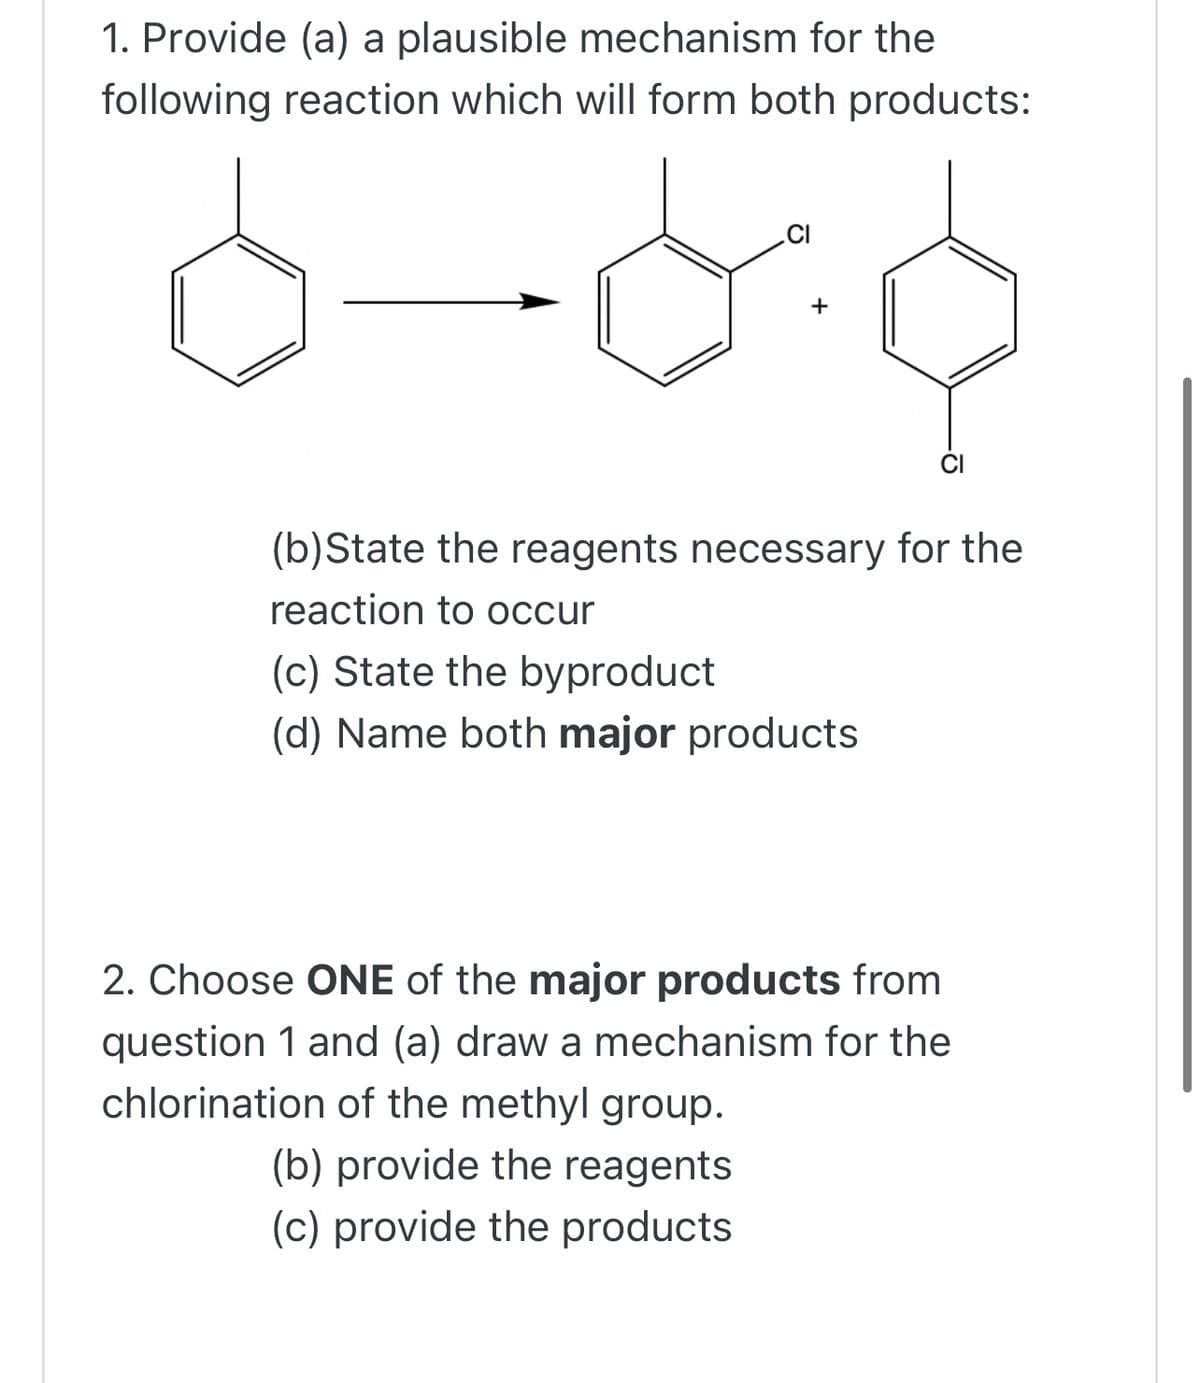 1. Provide (a) a plausible mechanism for the
following reaction which will form both products:
(b)State the reagents necessary for the
reaction to occur
(c) State the byproduct
(d) Name both major products
2. Choose ONE of the major products from
question 1 and (a) draw a mechanism for the
chlorination of the methyl group.
(b) provide the reagents
(c) provide the products
